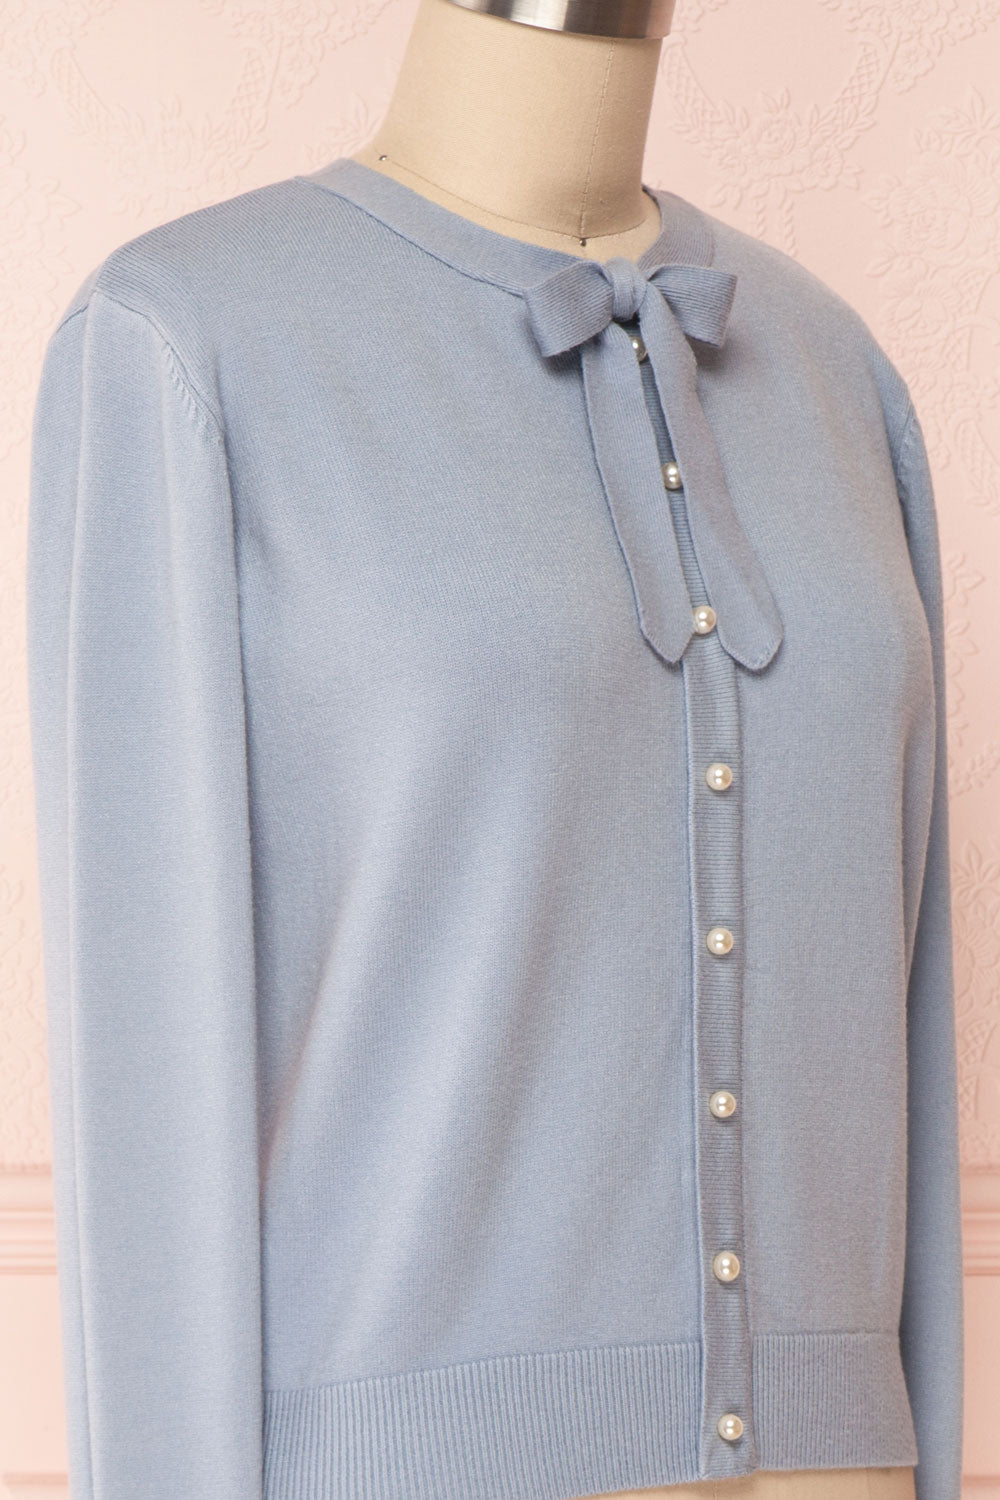 Matviyko Powder Blue Soft Knit Sweater with Pearls | Boutique 1861 side close-up